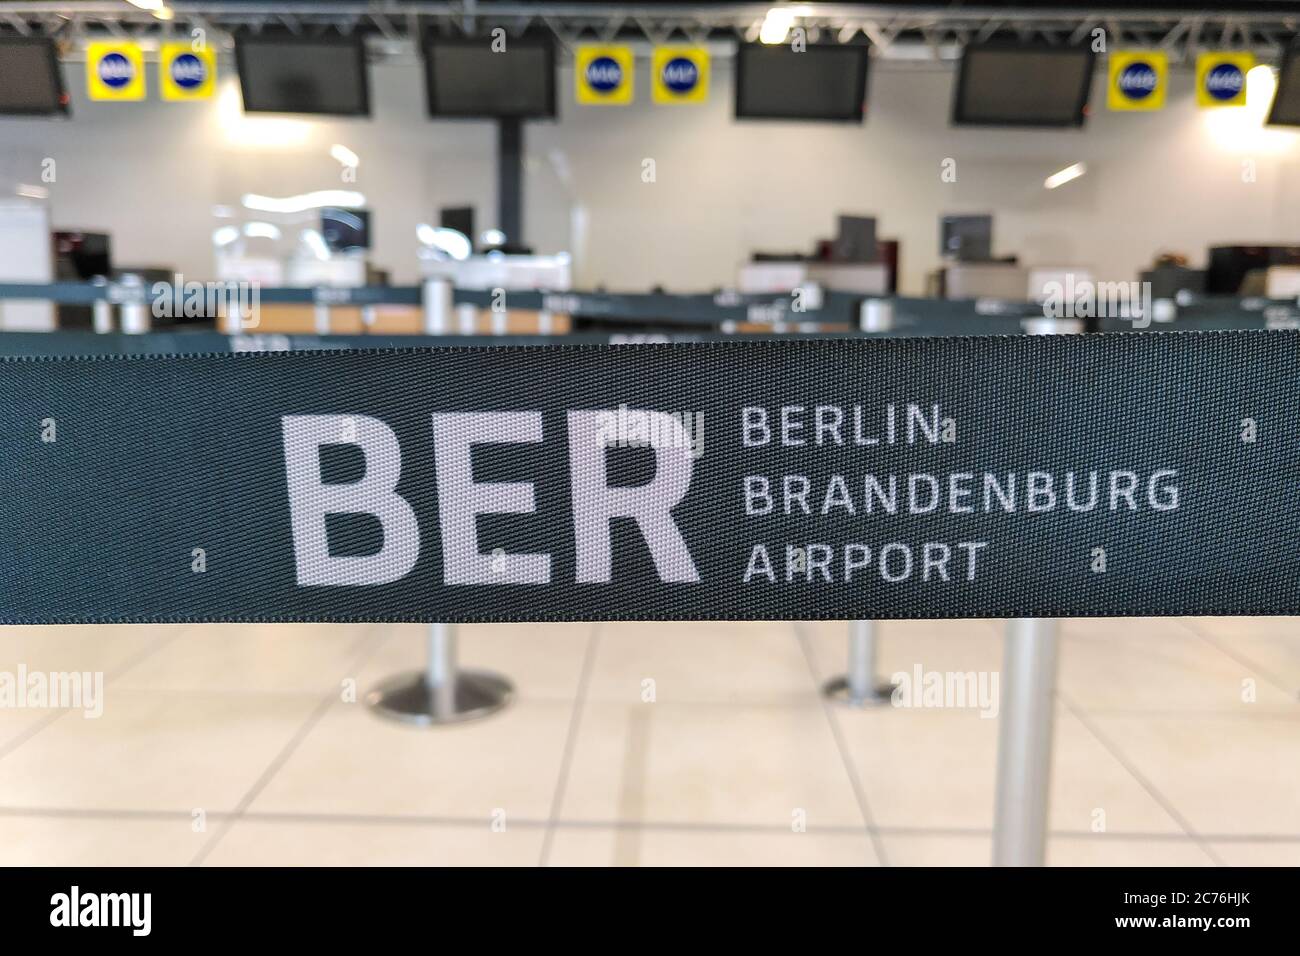 Barrier tape for BER Berlin Brandenburg airport used at Schönefeld airport at the deserted check-in desks during the coronavirus crisis in Germany. Stock Photo